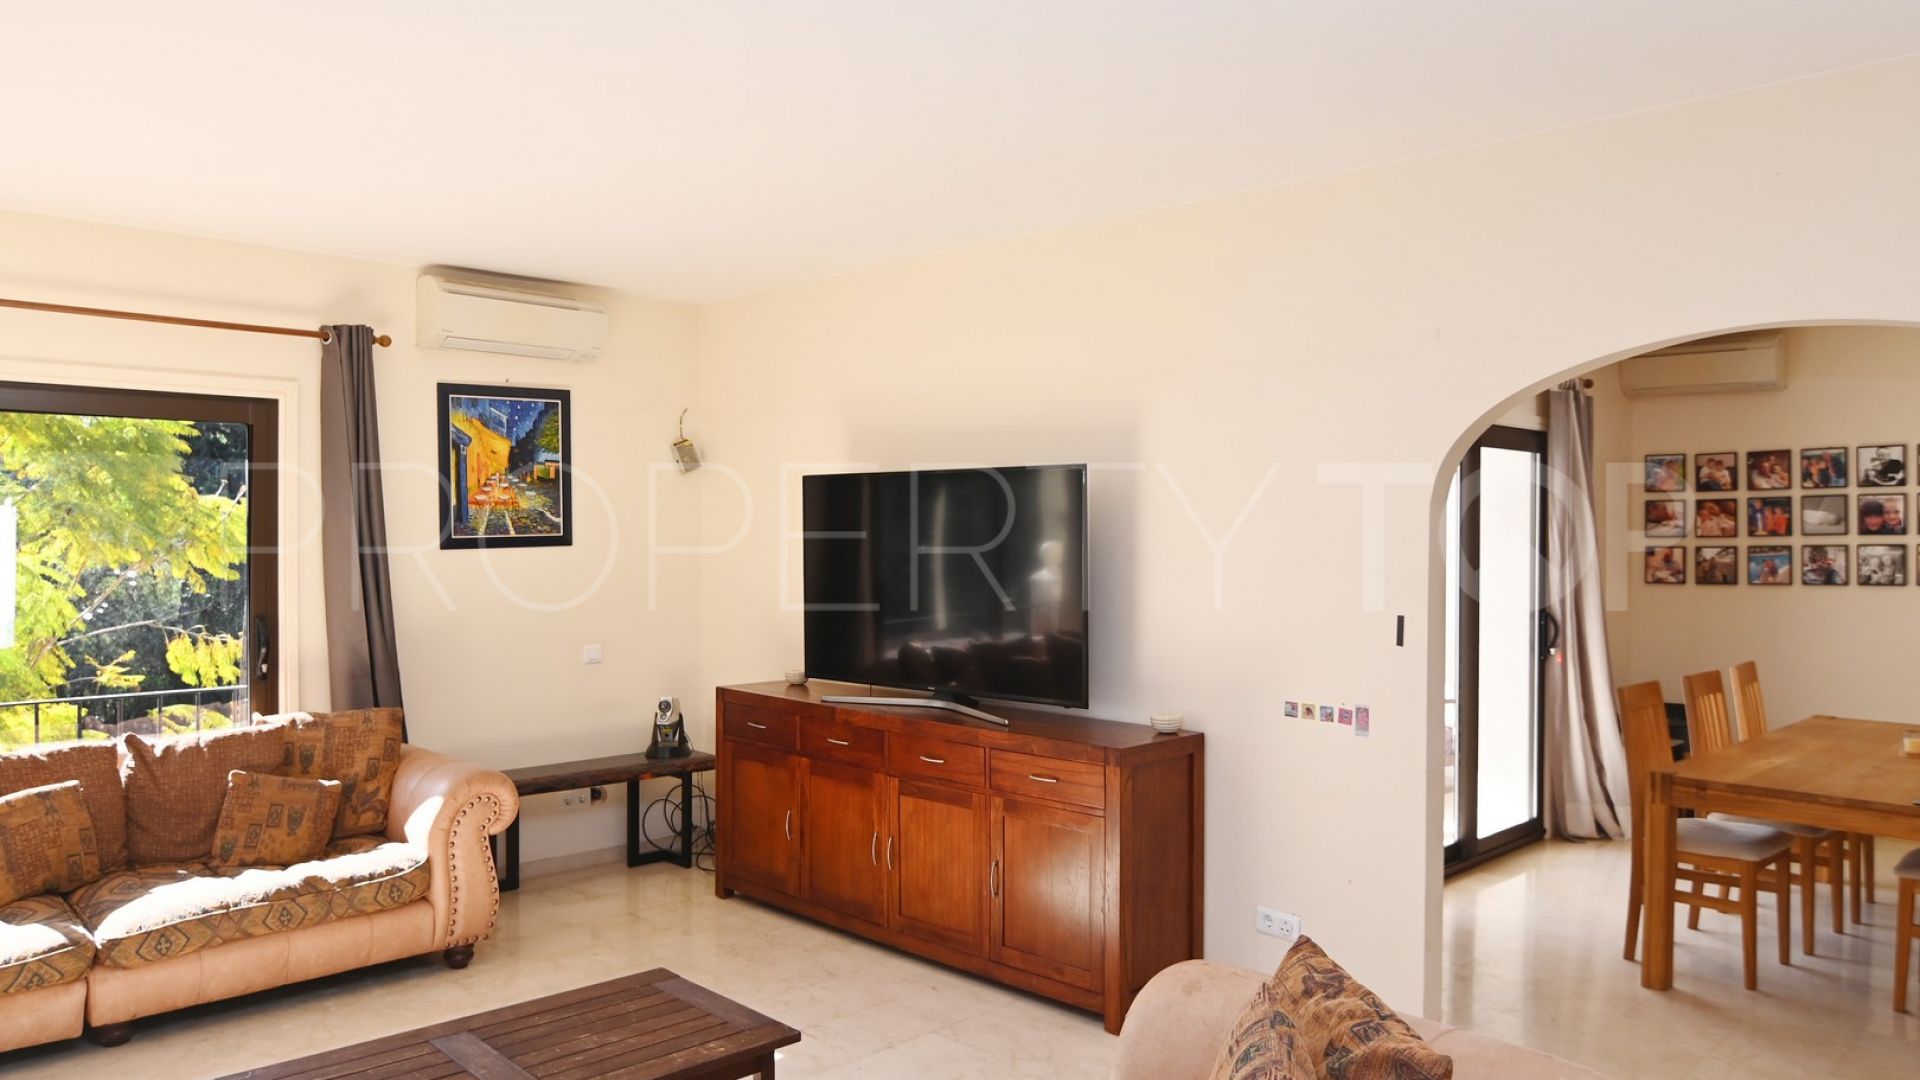 For sale villa in Zona B with 5 bedrooms